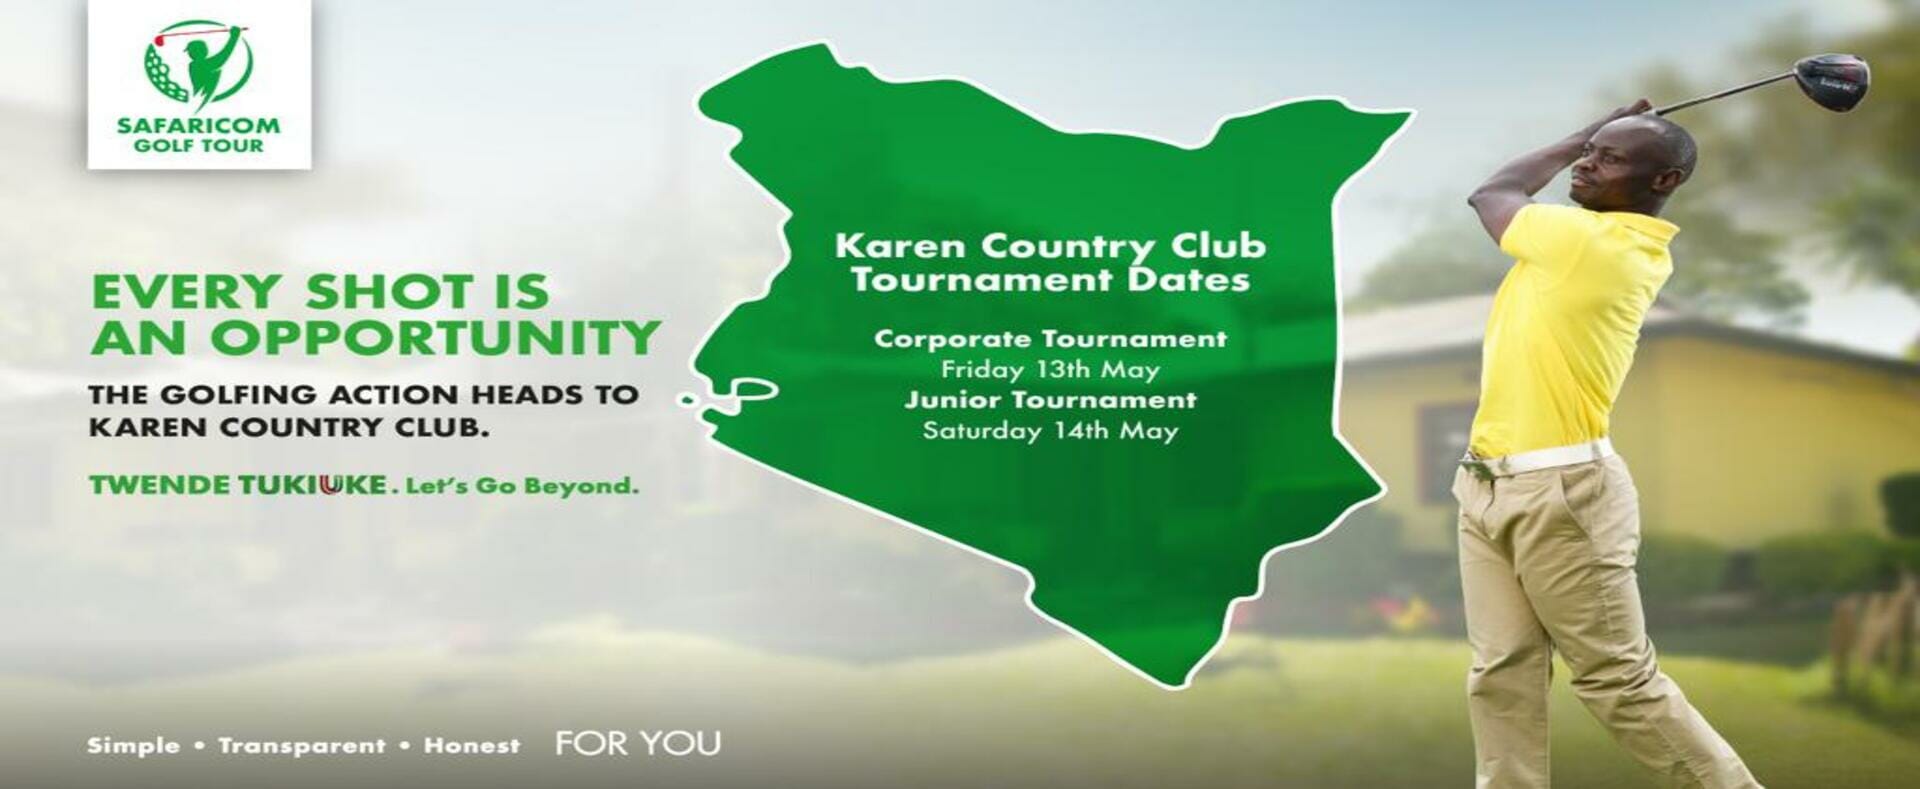 Karen Country Club to Host over 280 Golfers For 7th Leg of the Safaricom Golf Tour